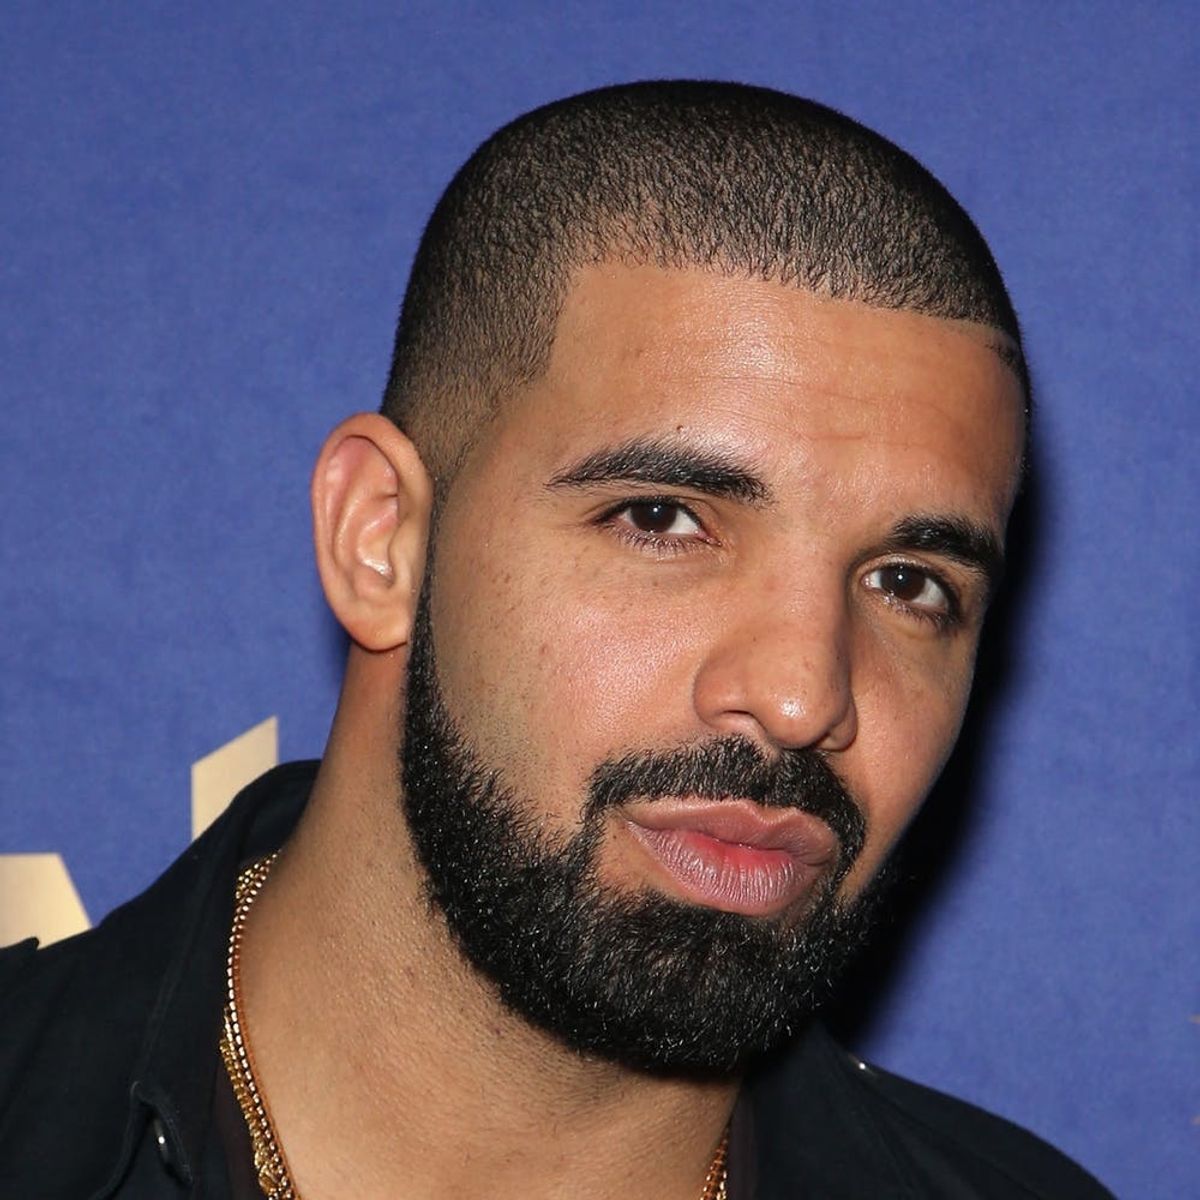 Drake Has Been Dropping Major Coin on Birkin Bags for His Future Wife